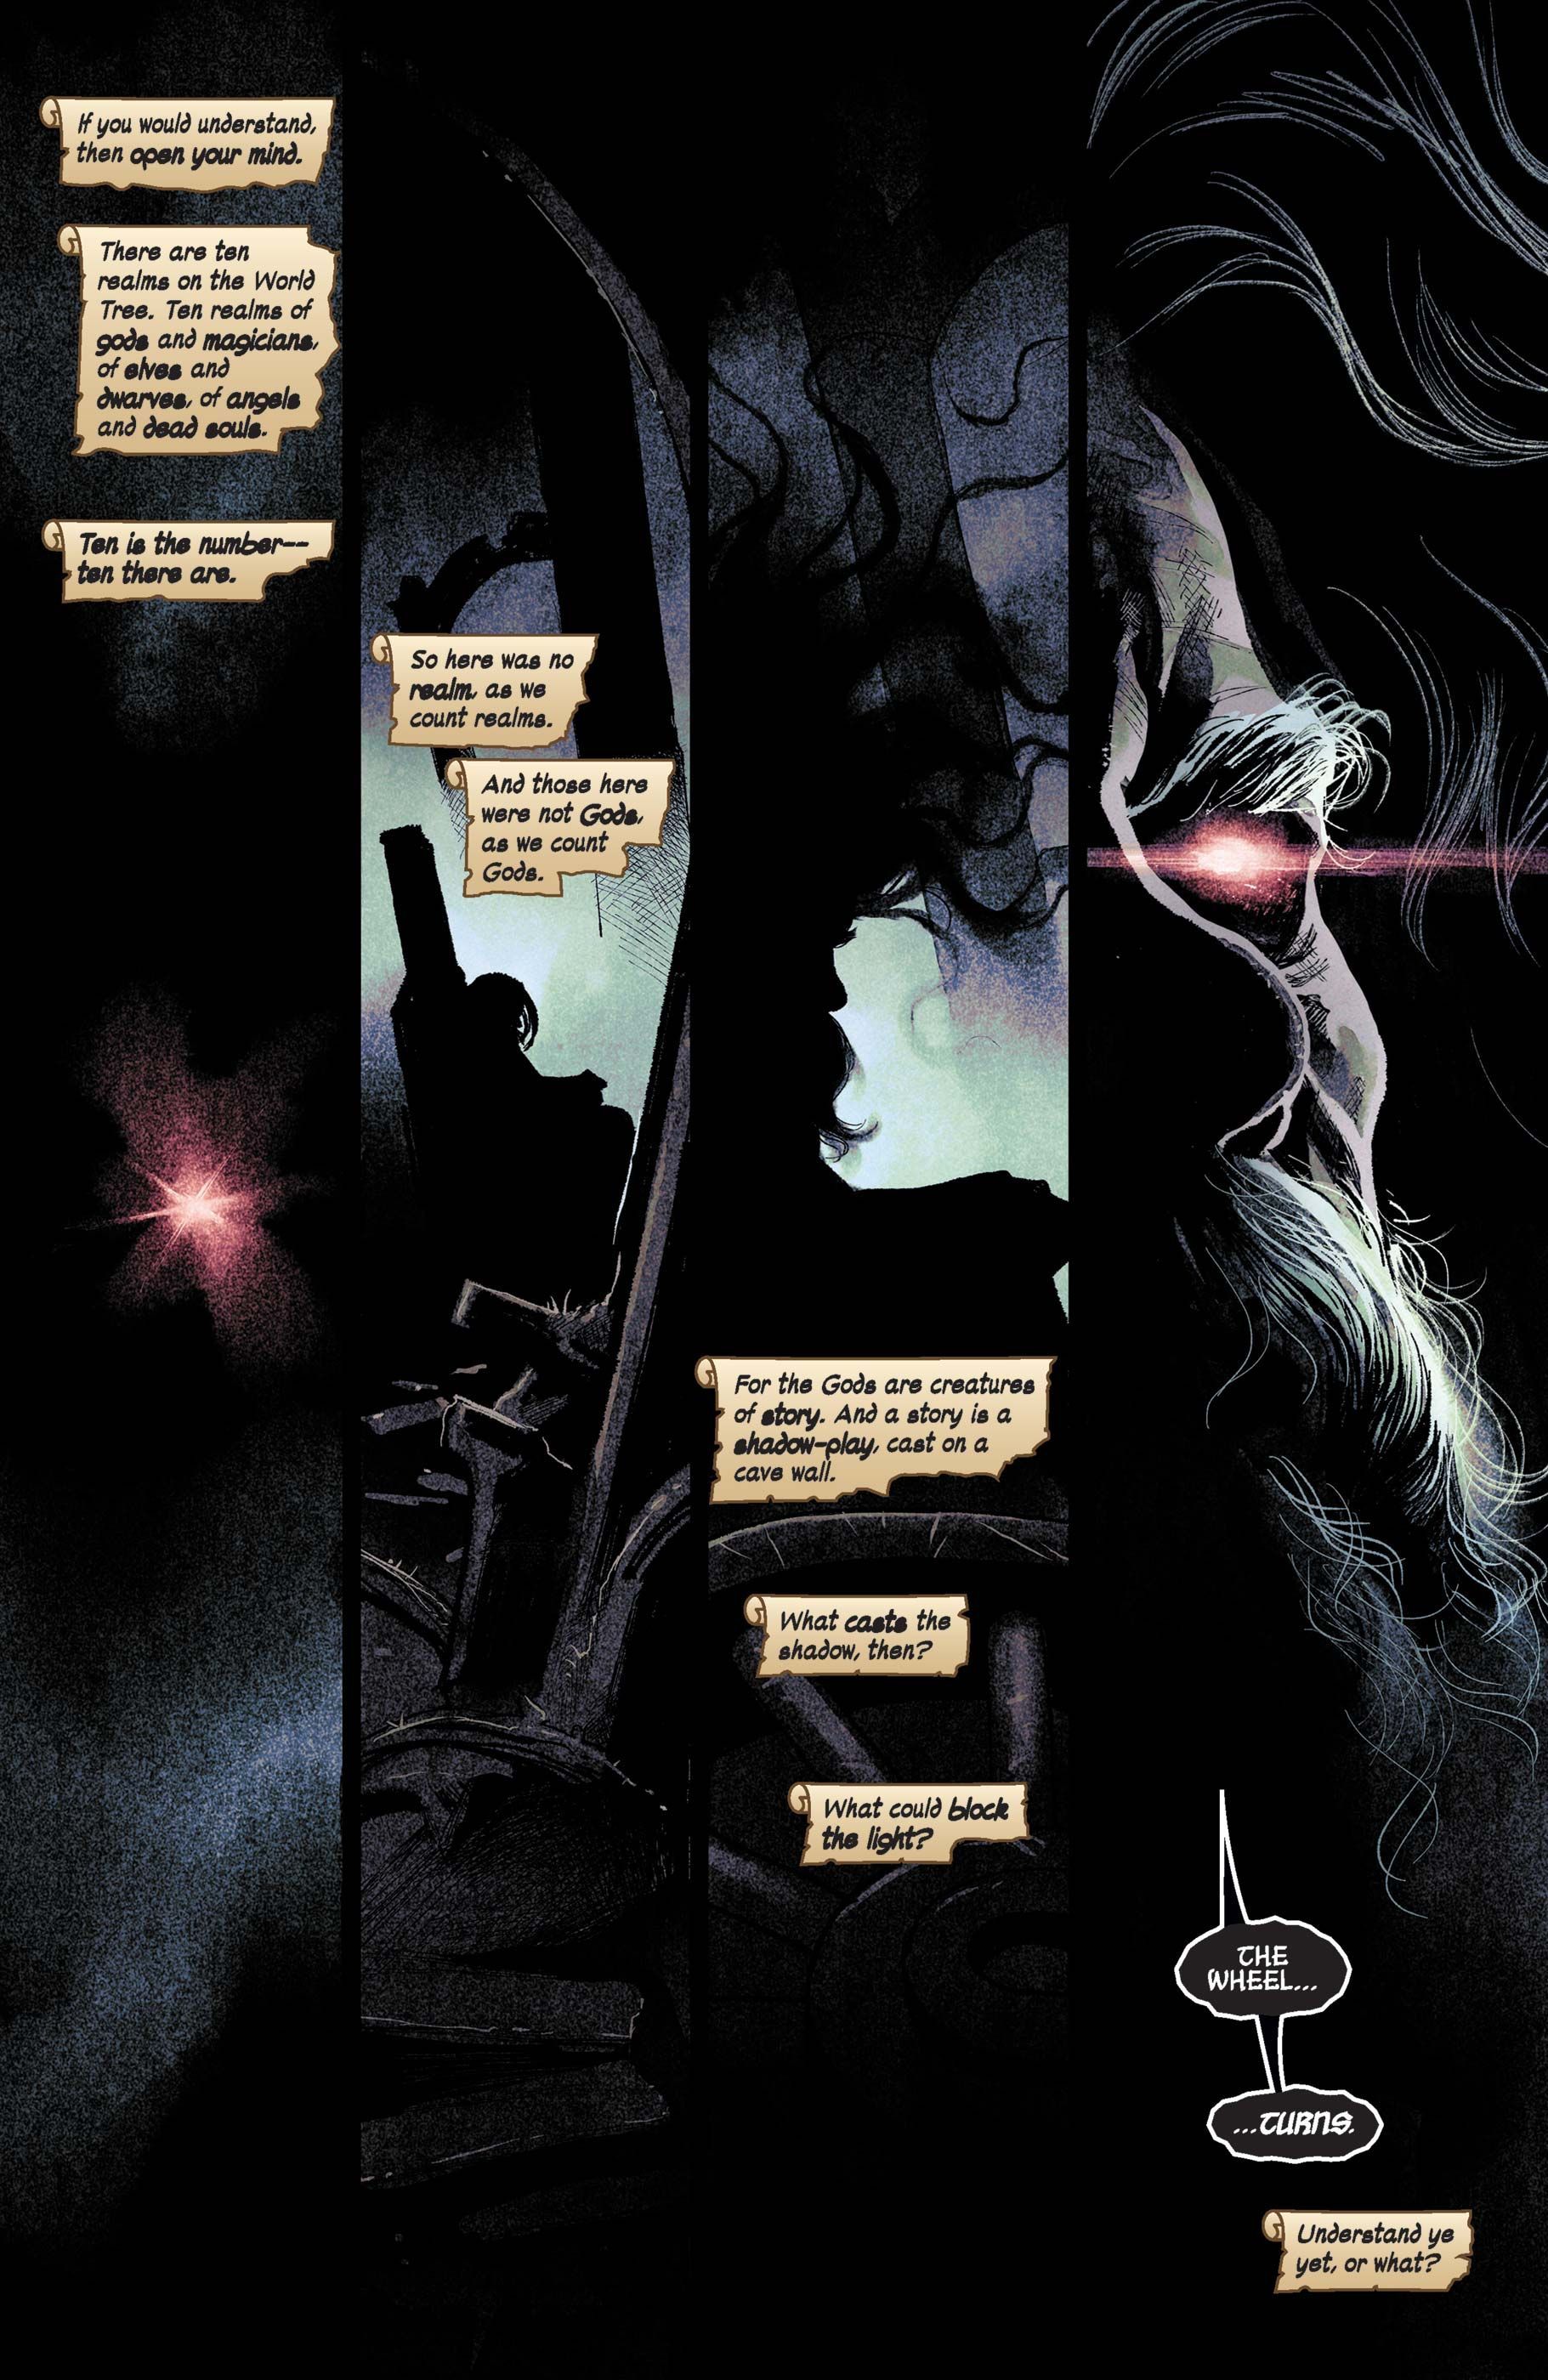 the Introduction of Toranos in Immortal Thor #1.